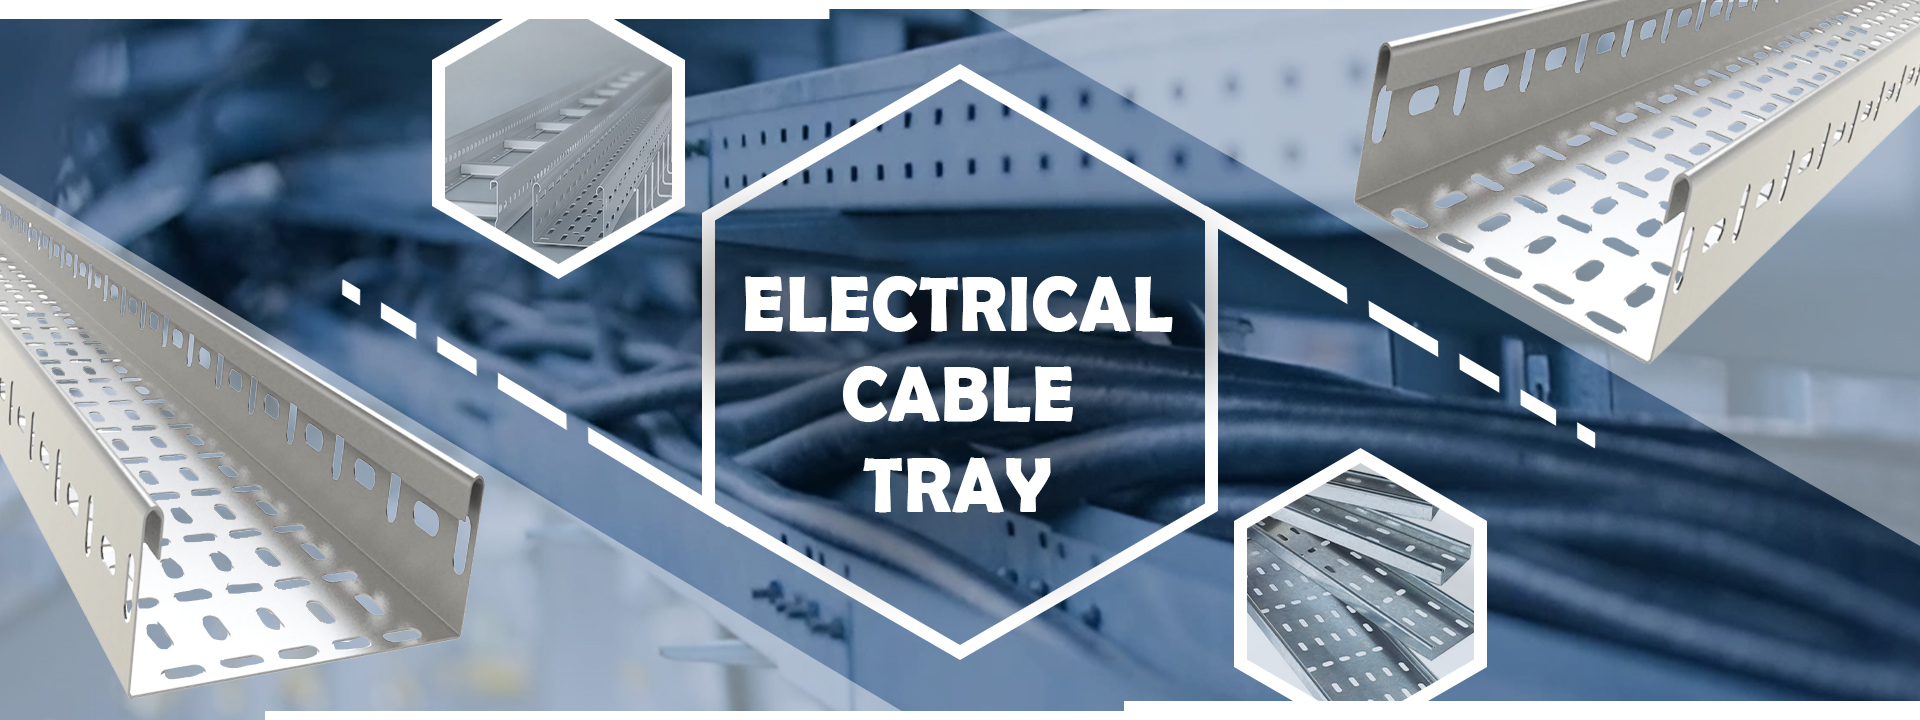 Electrical Cable Tray Manufacturers in Kyrgyzstan